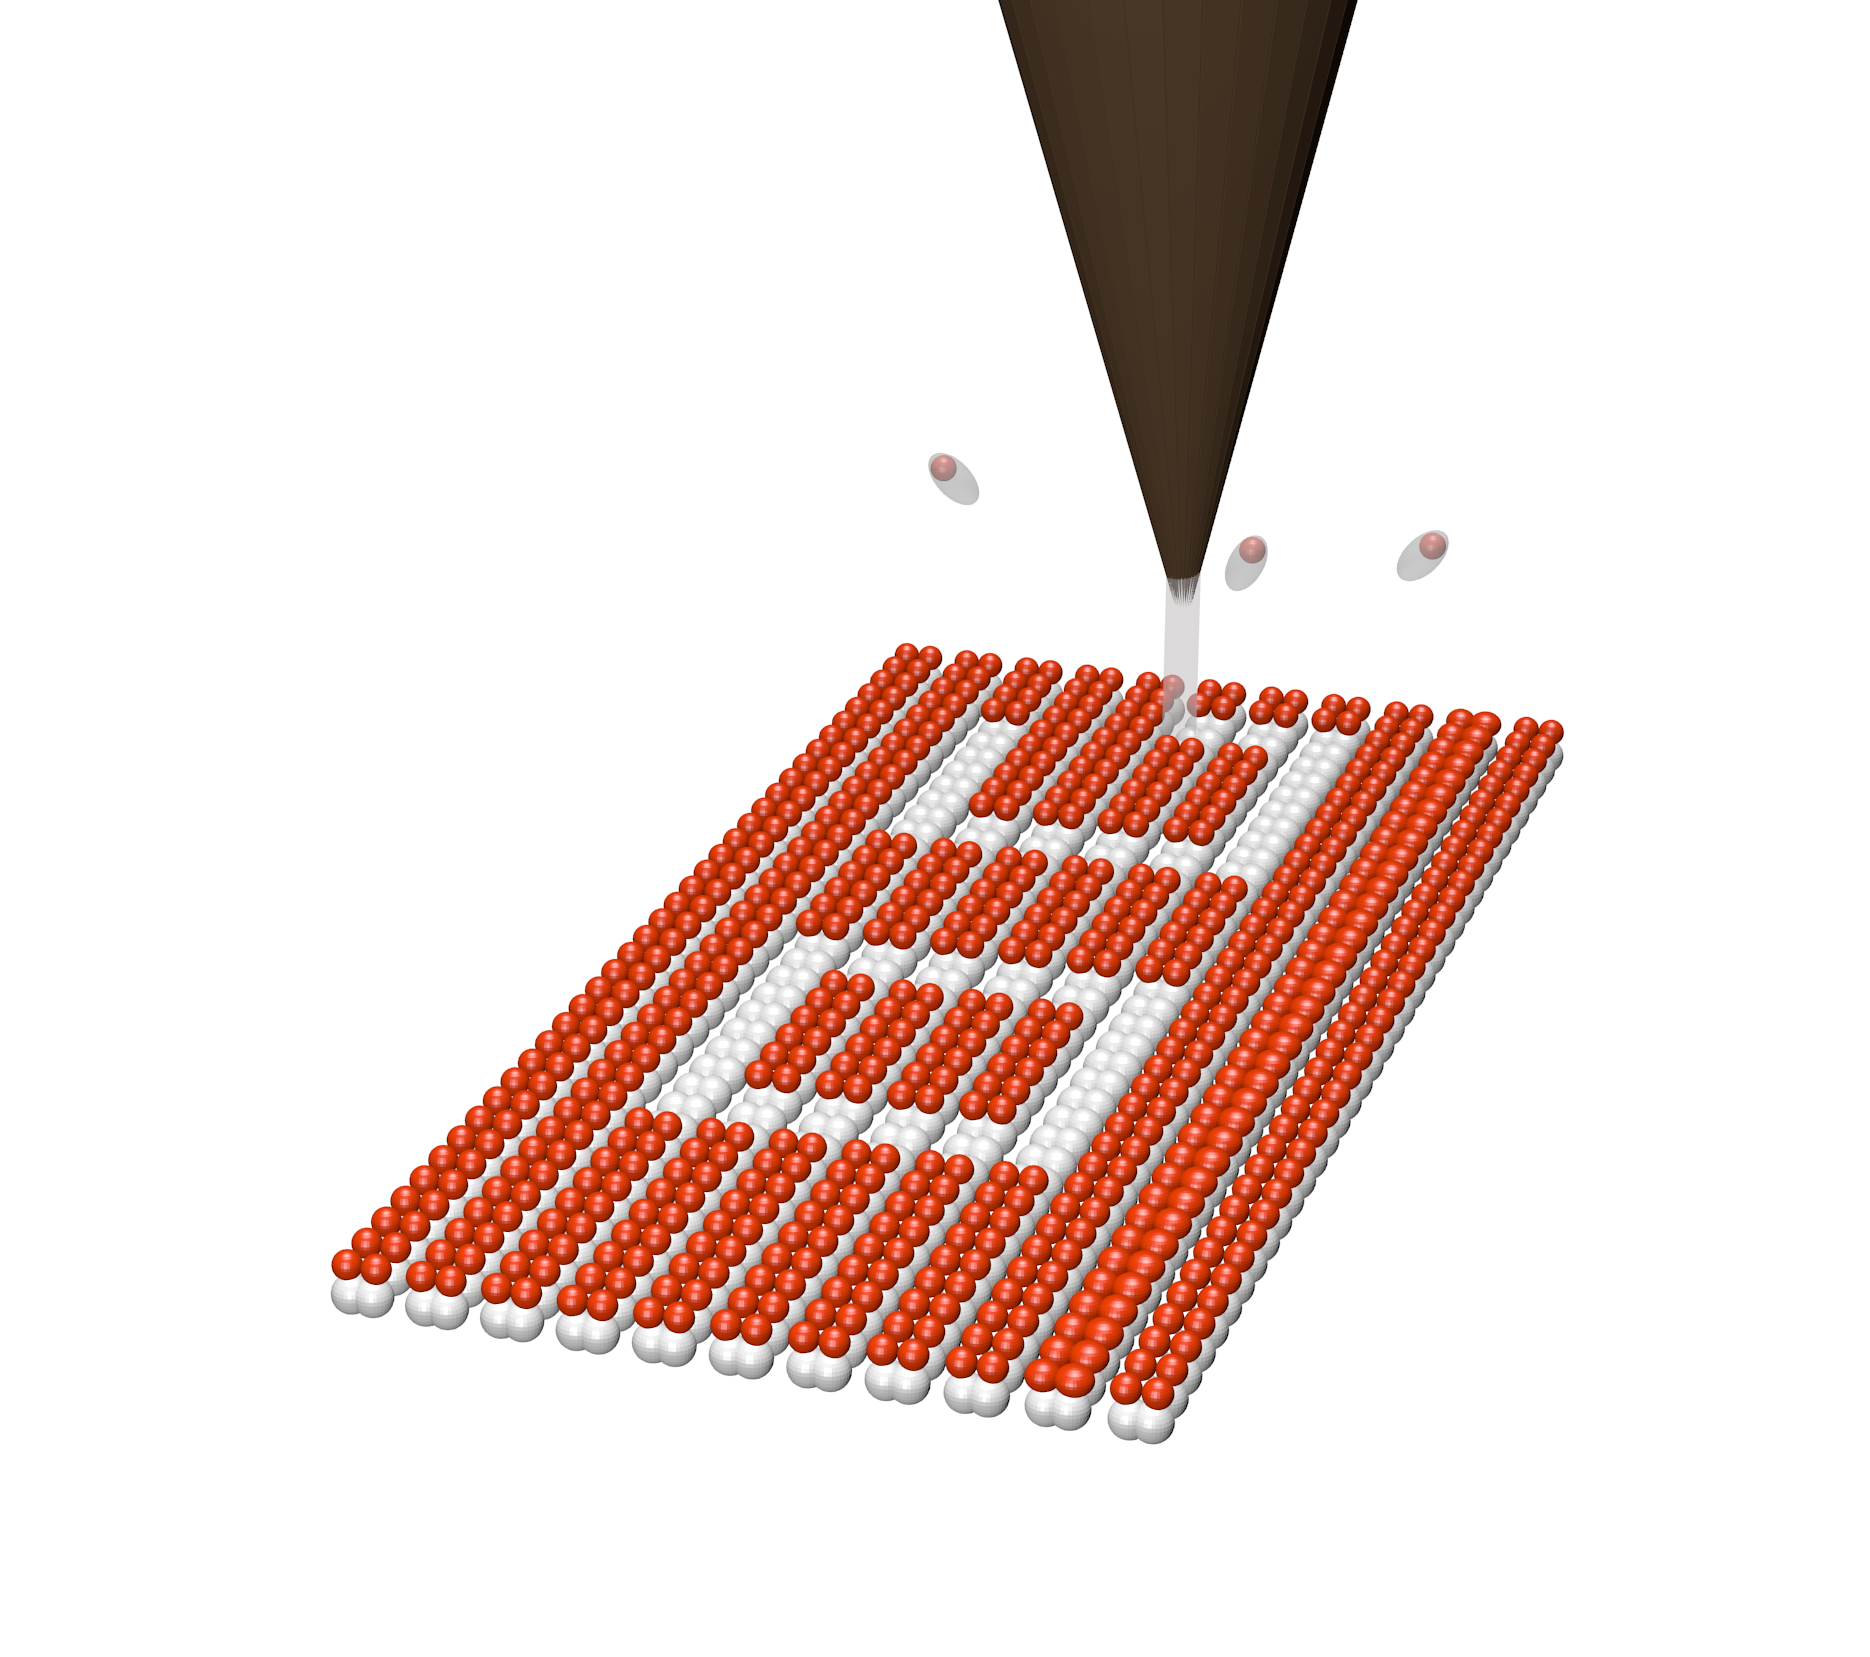 An STM tip removing surface H atoms from a Si(001) surface, and a 3D STM image of the result. For single-dimer-row line width, the tip is set to 4.5 V sample bias, 4 nA tunnel current, with a dose on each H atom of 4 mC/cm.